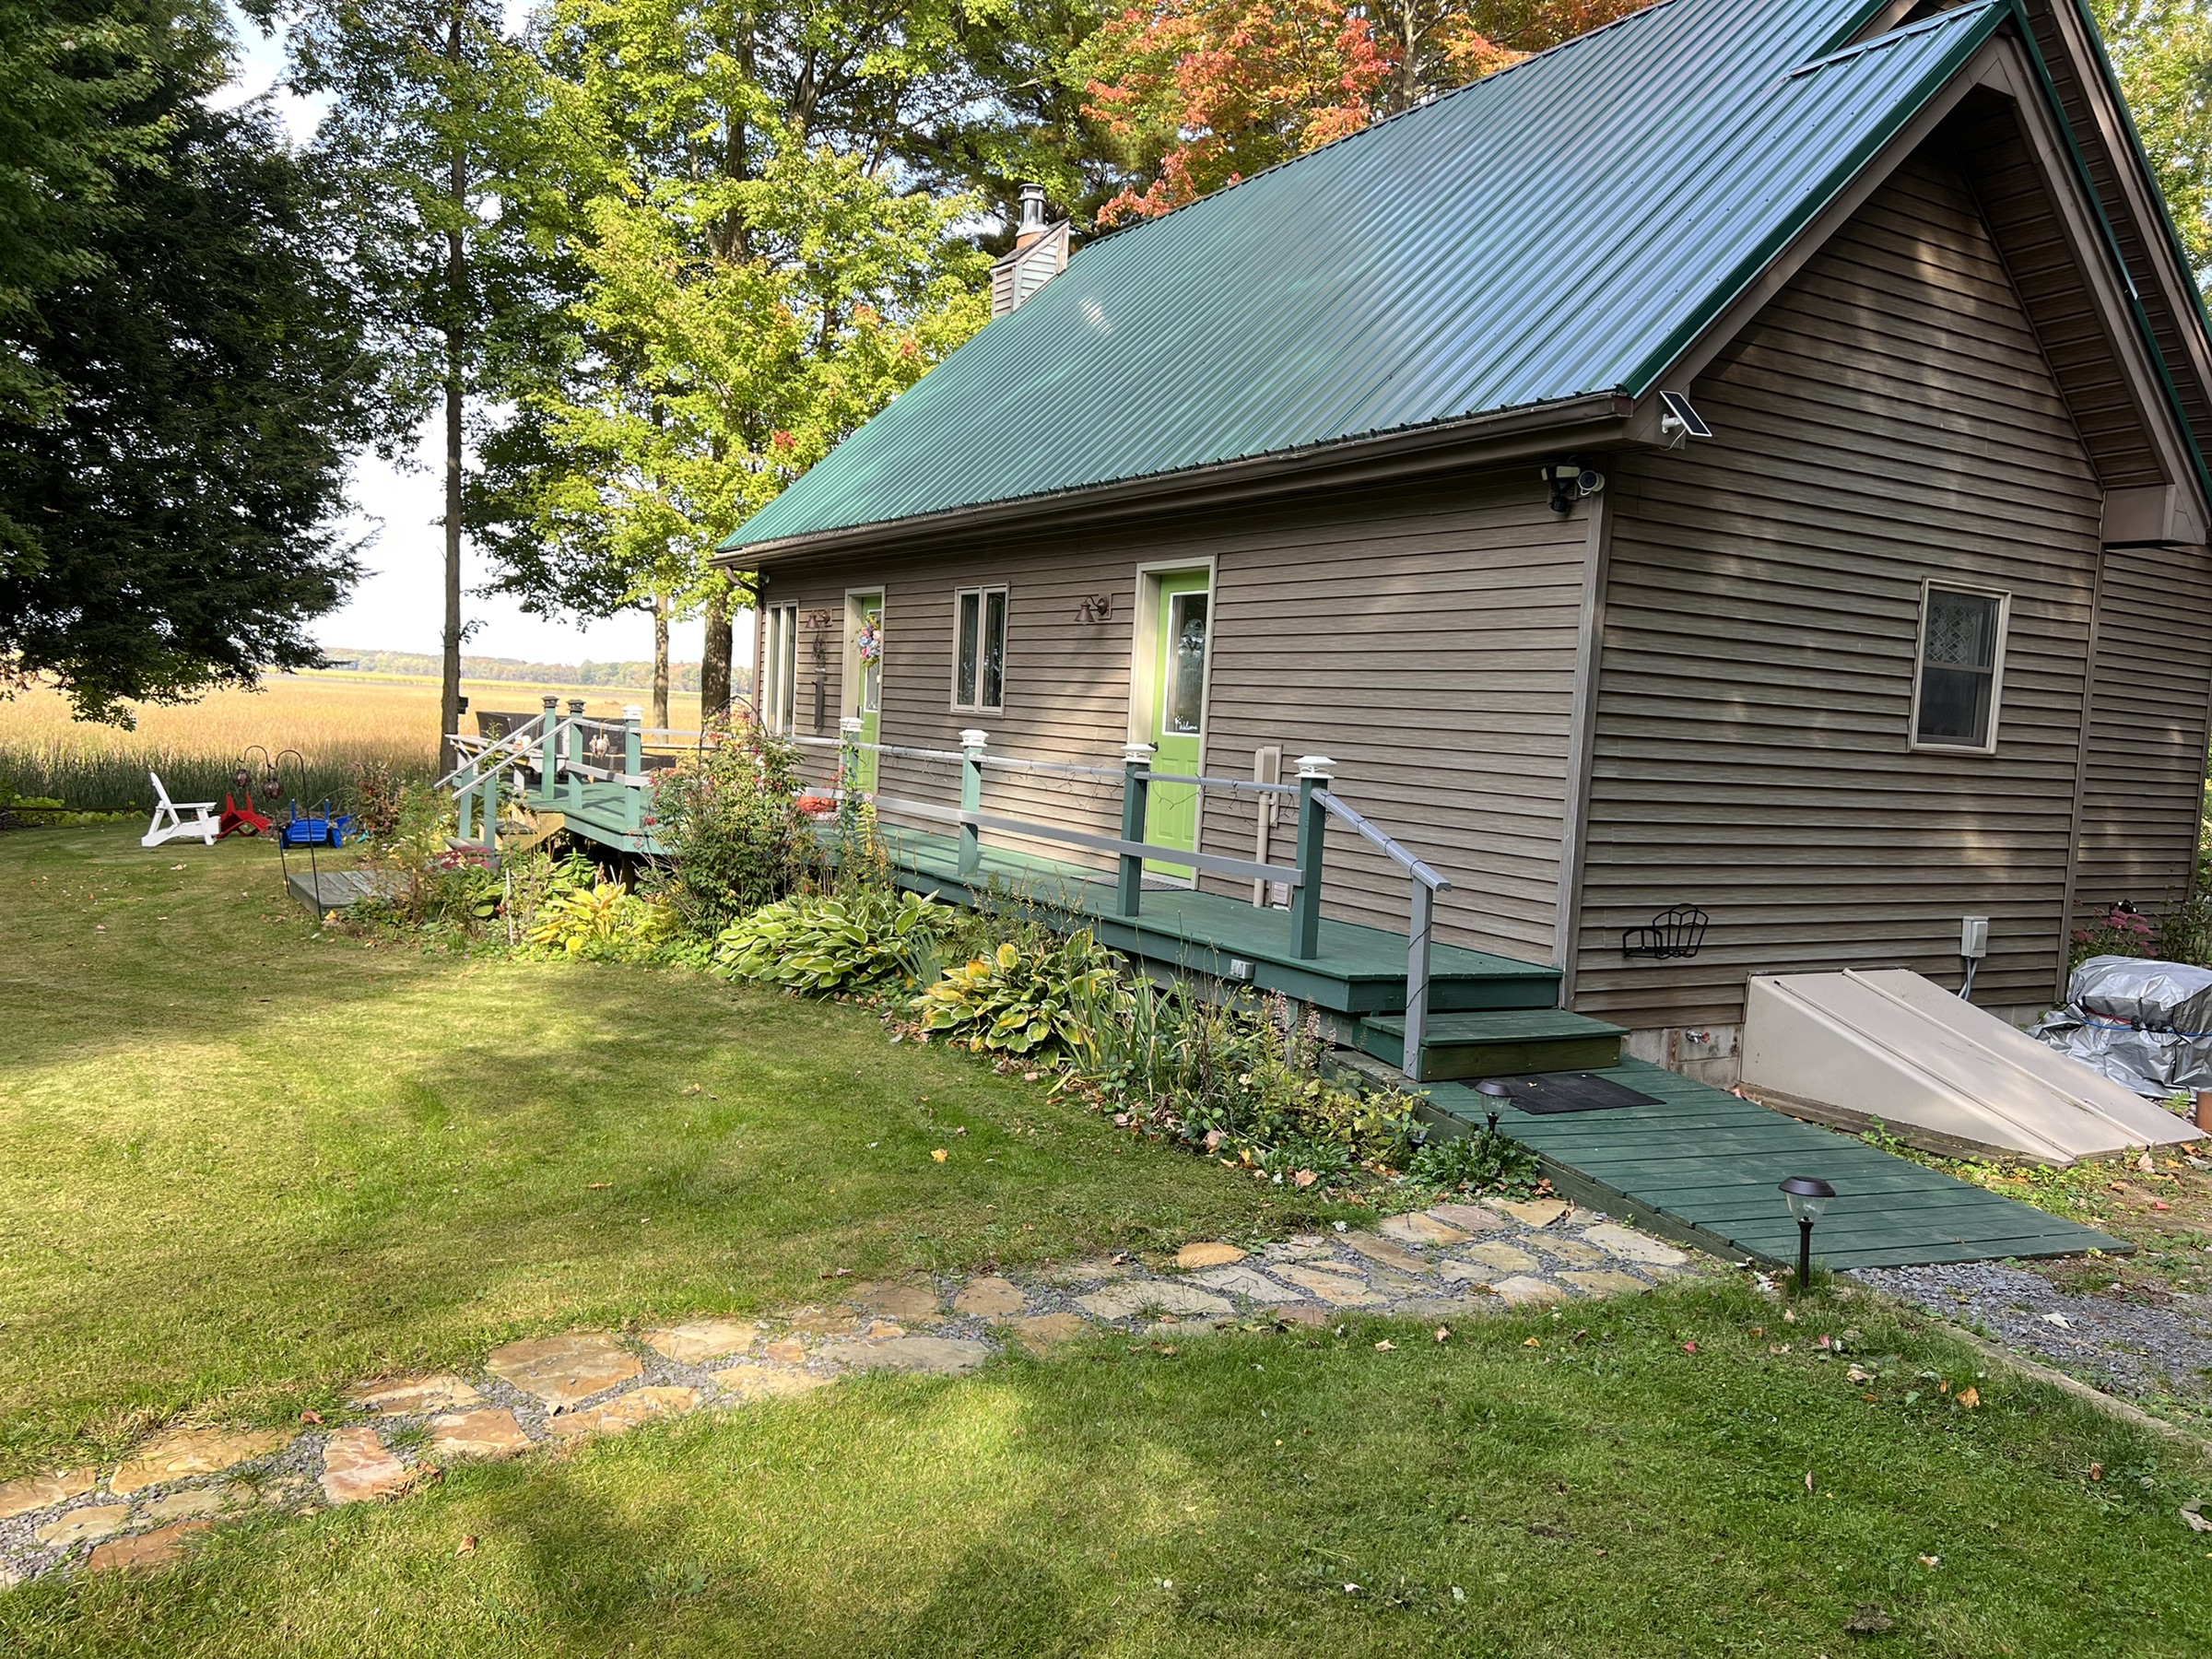 All Season Cottage + 2 mins to fishing access site - Cottages for Rent in Sackets Harbor, New York, United States - Airbnb